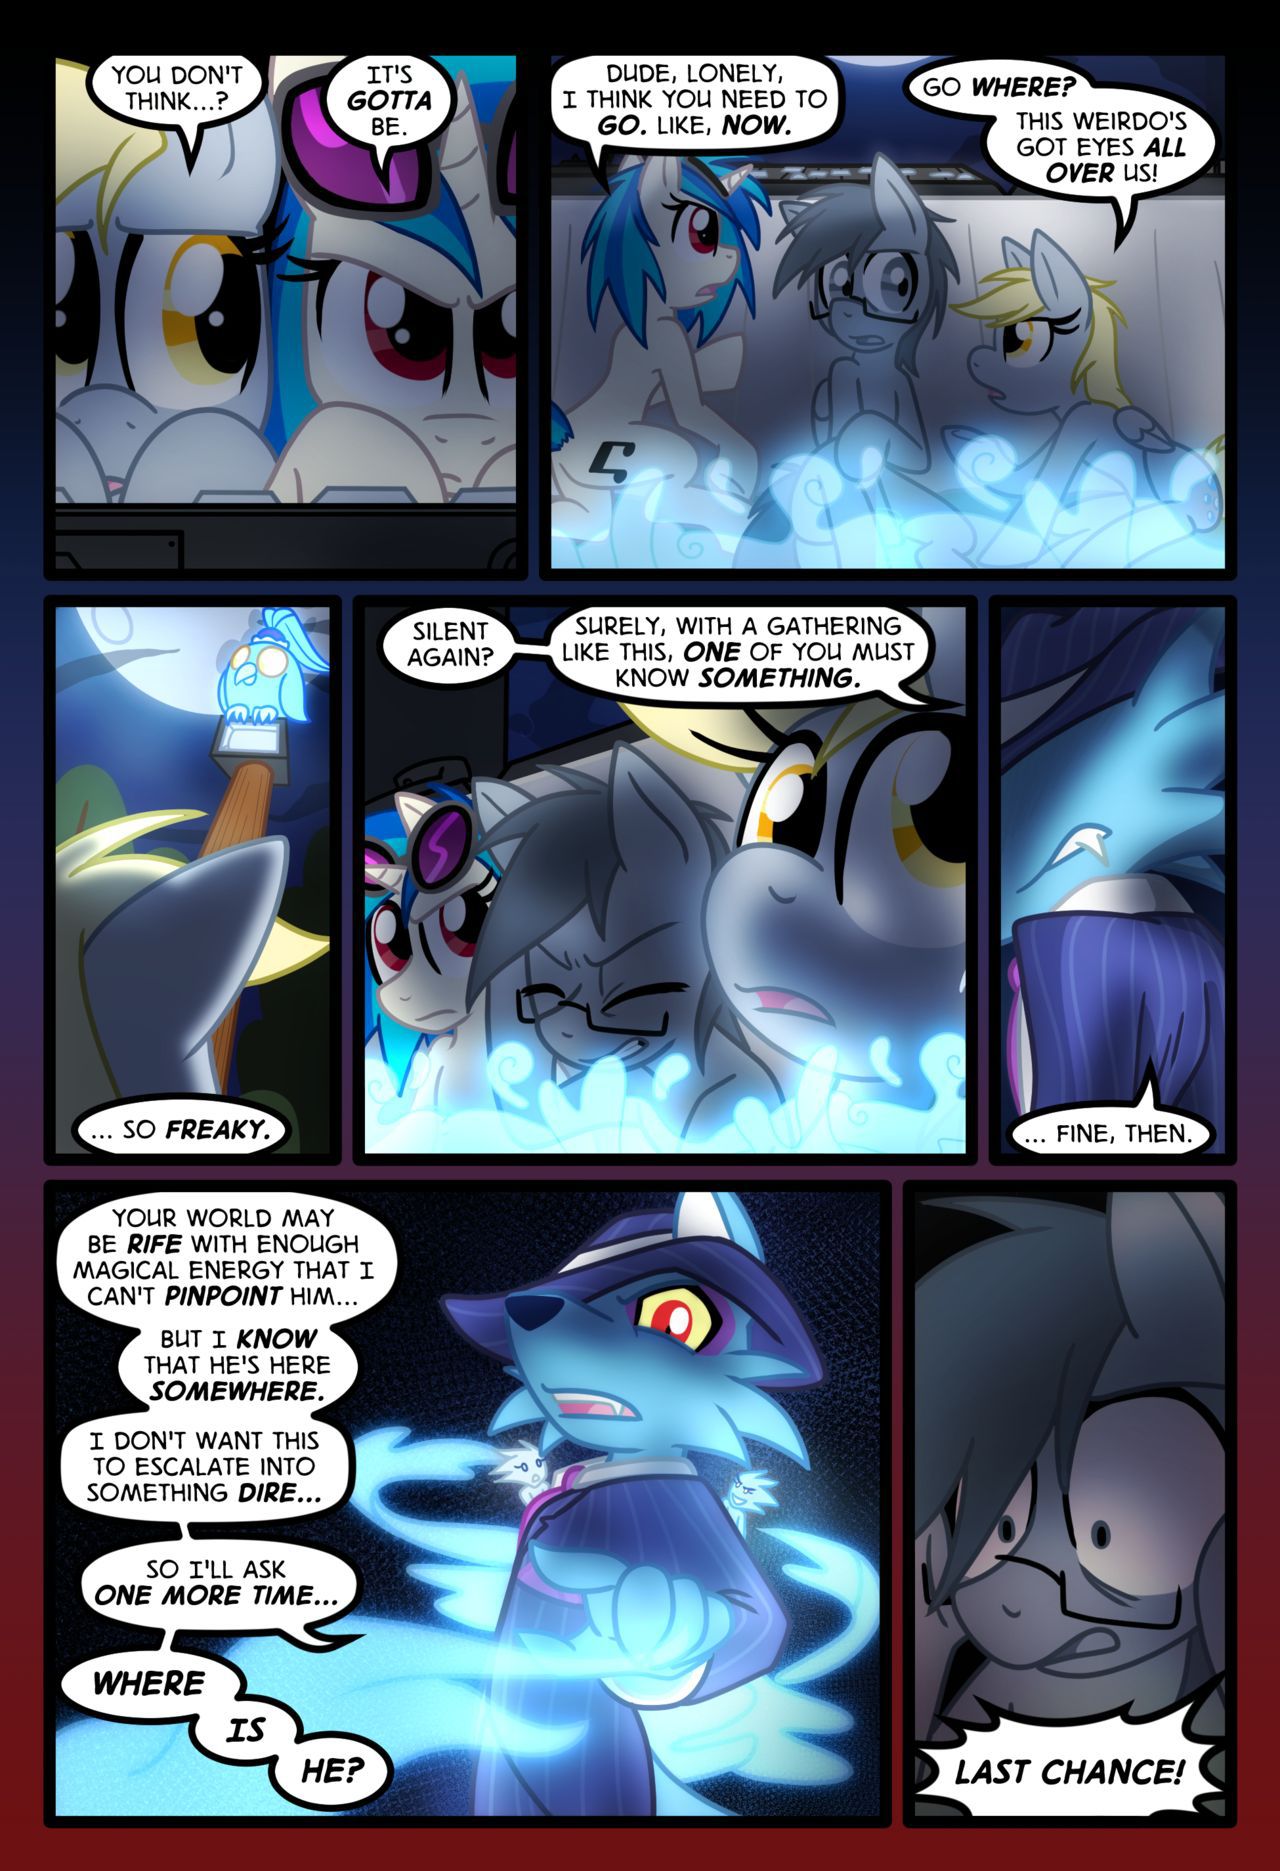 [Zaron] Lonely Hooves (My Little Pony Friendship Is Magic) [Ongoing] 119